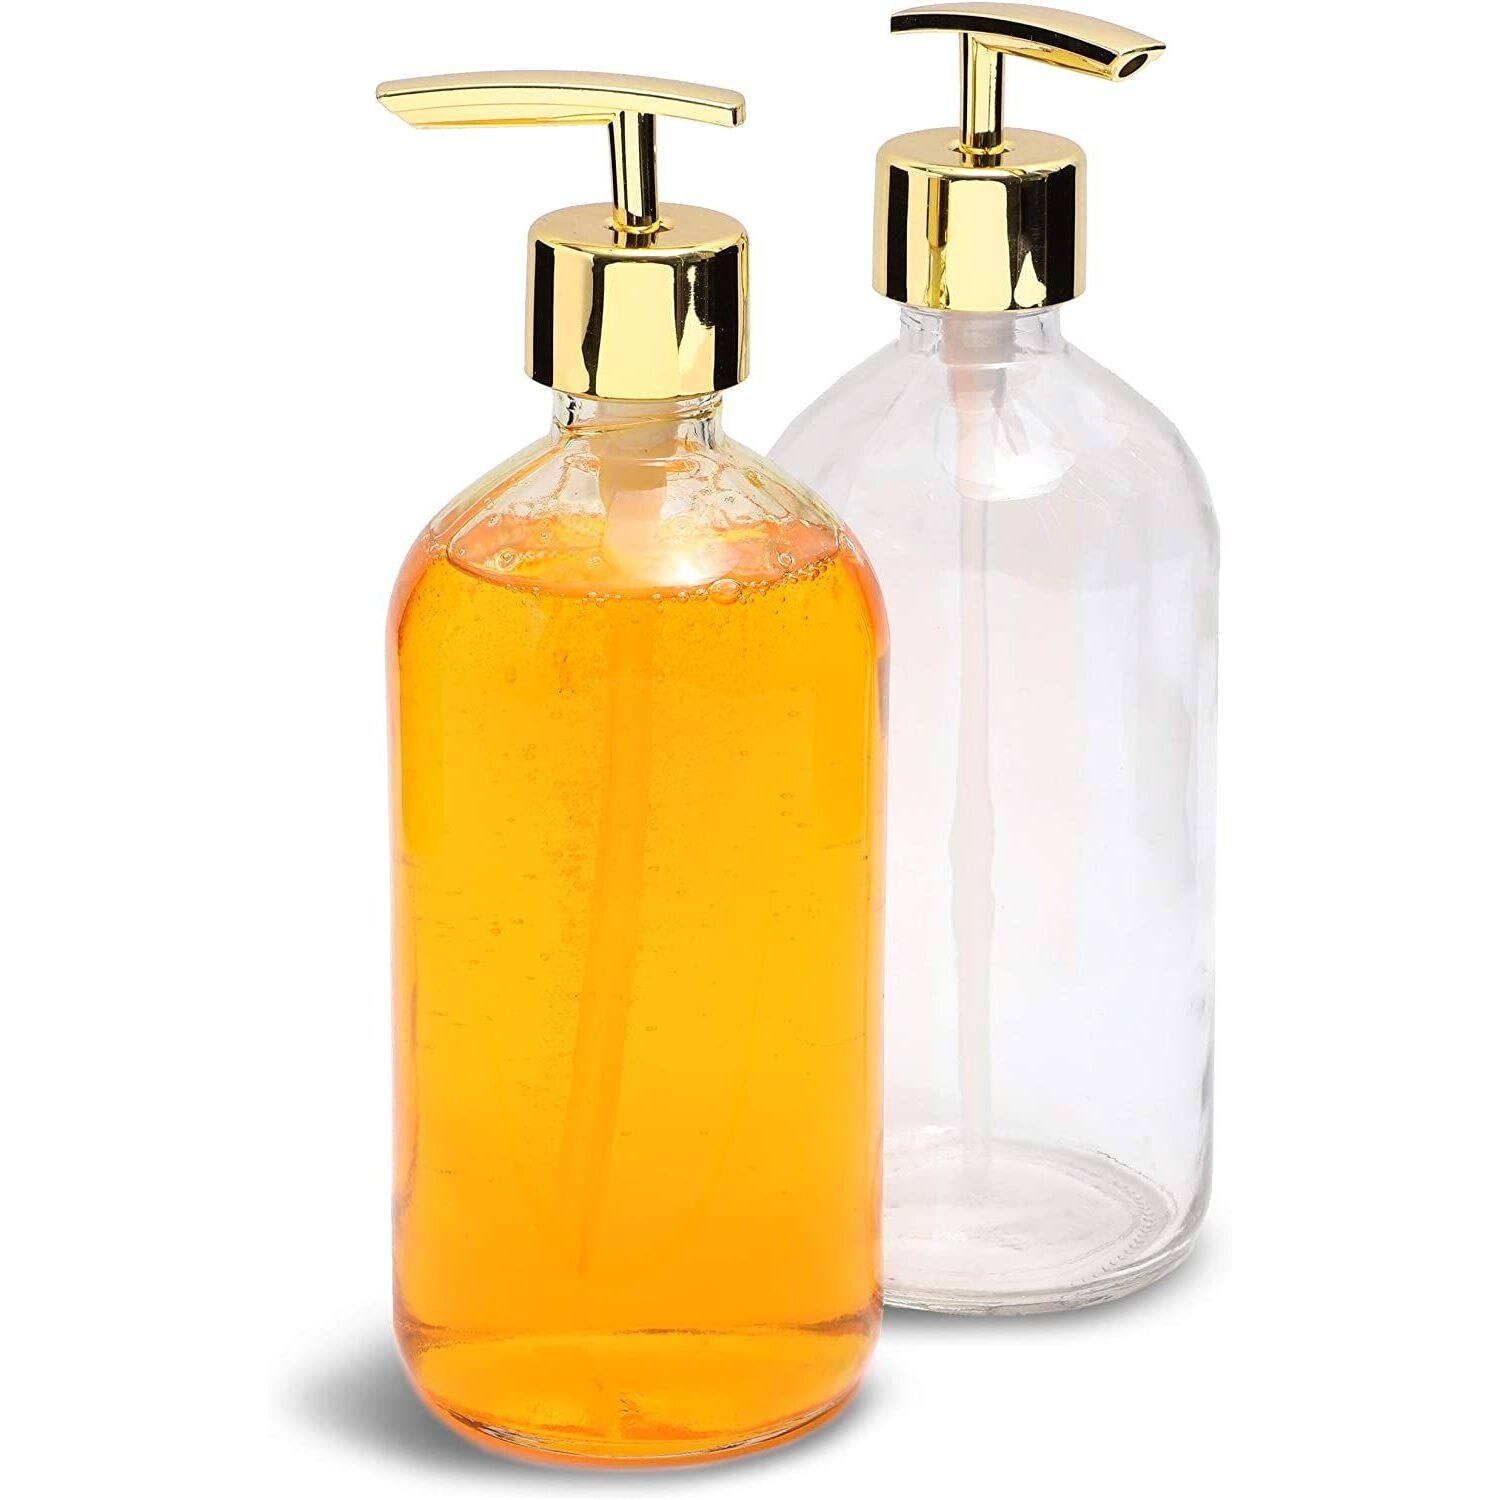 2-Pack 16 Oz Amber Glass Hand Dish Soap Dispenser with Plastic Pump, Empty  Refillable Soap Pump Dispenser for Bathroom and Kitchen Sink